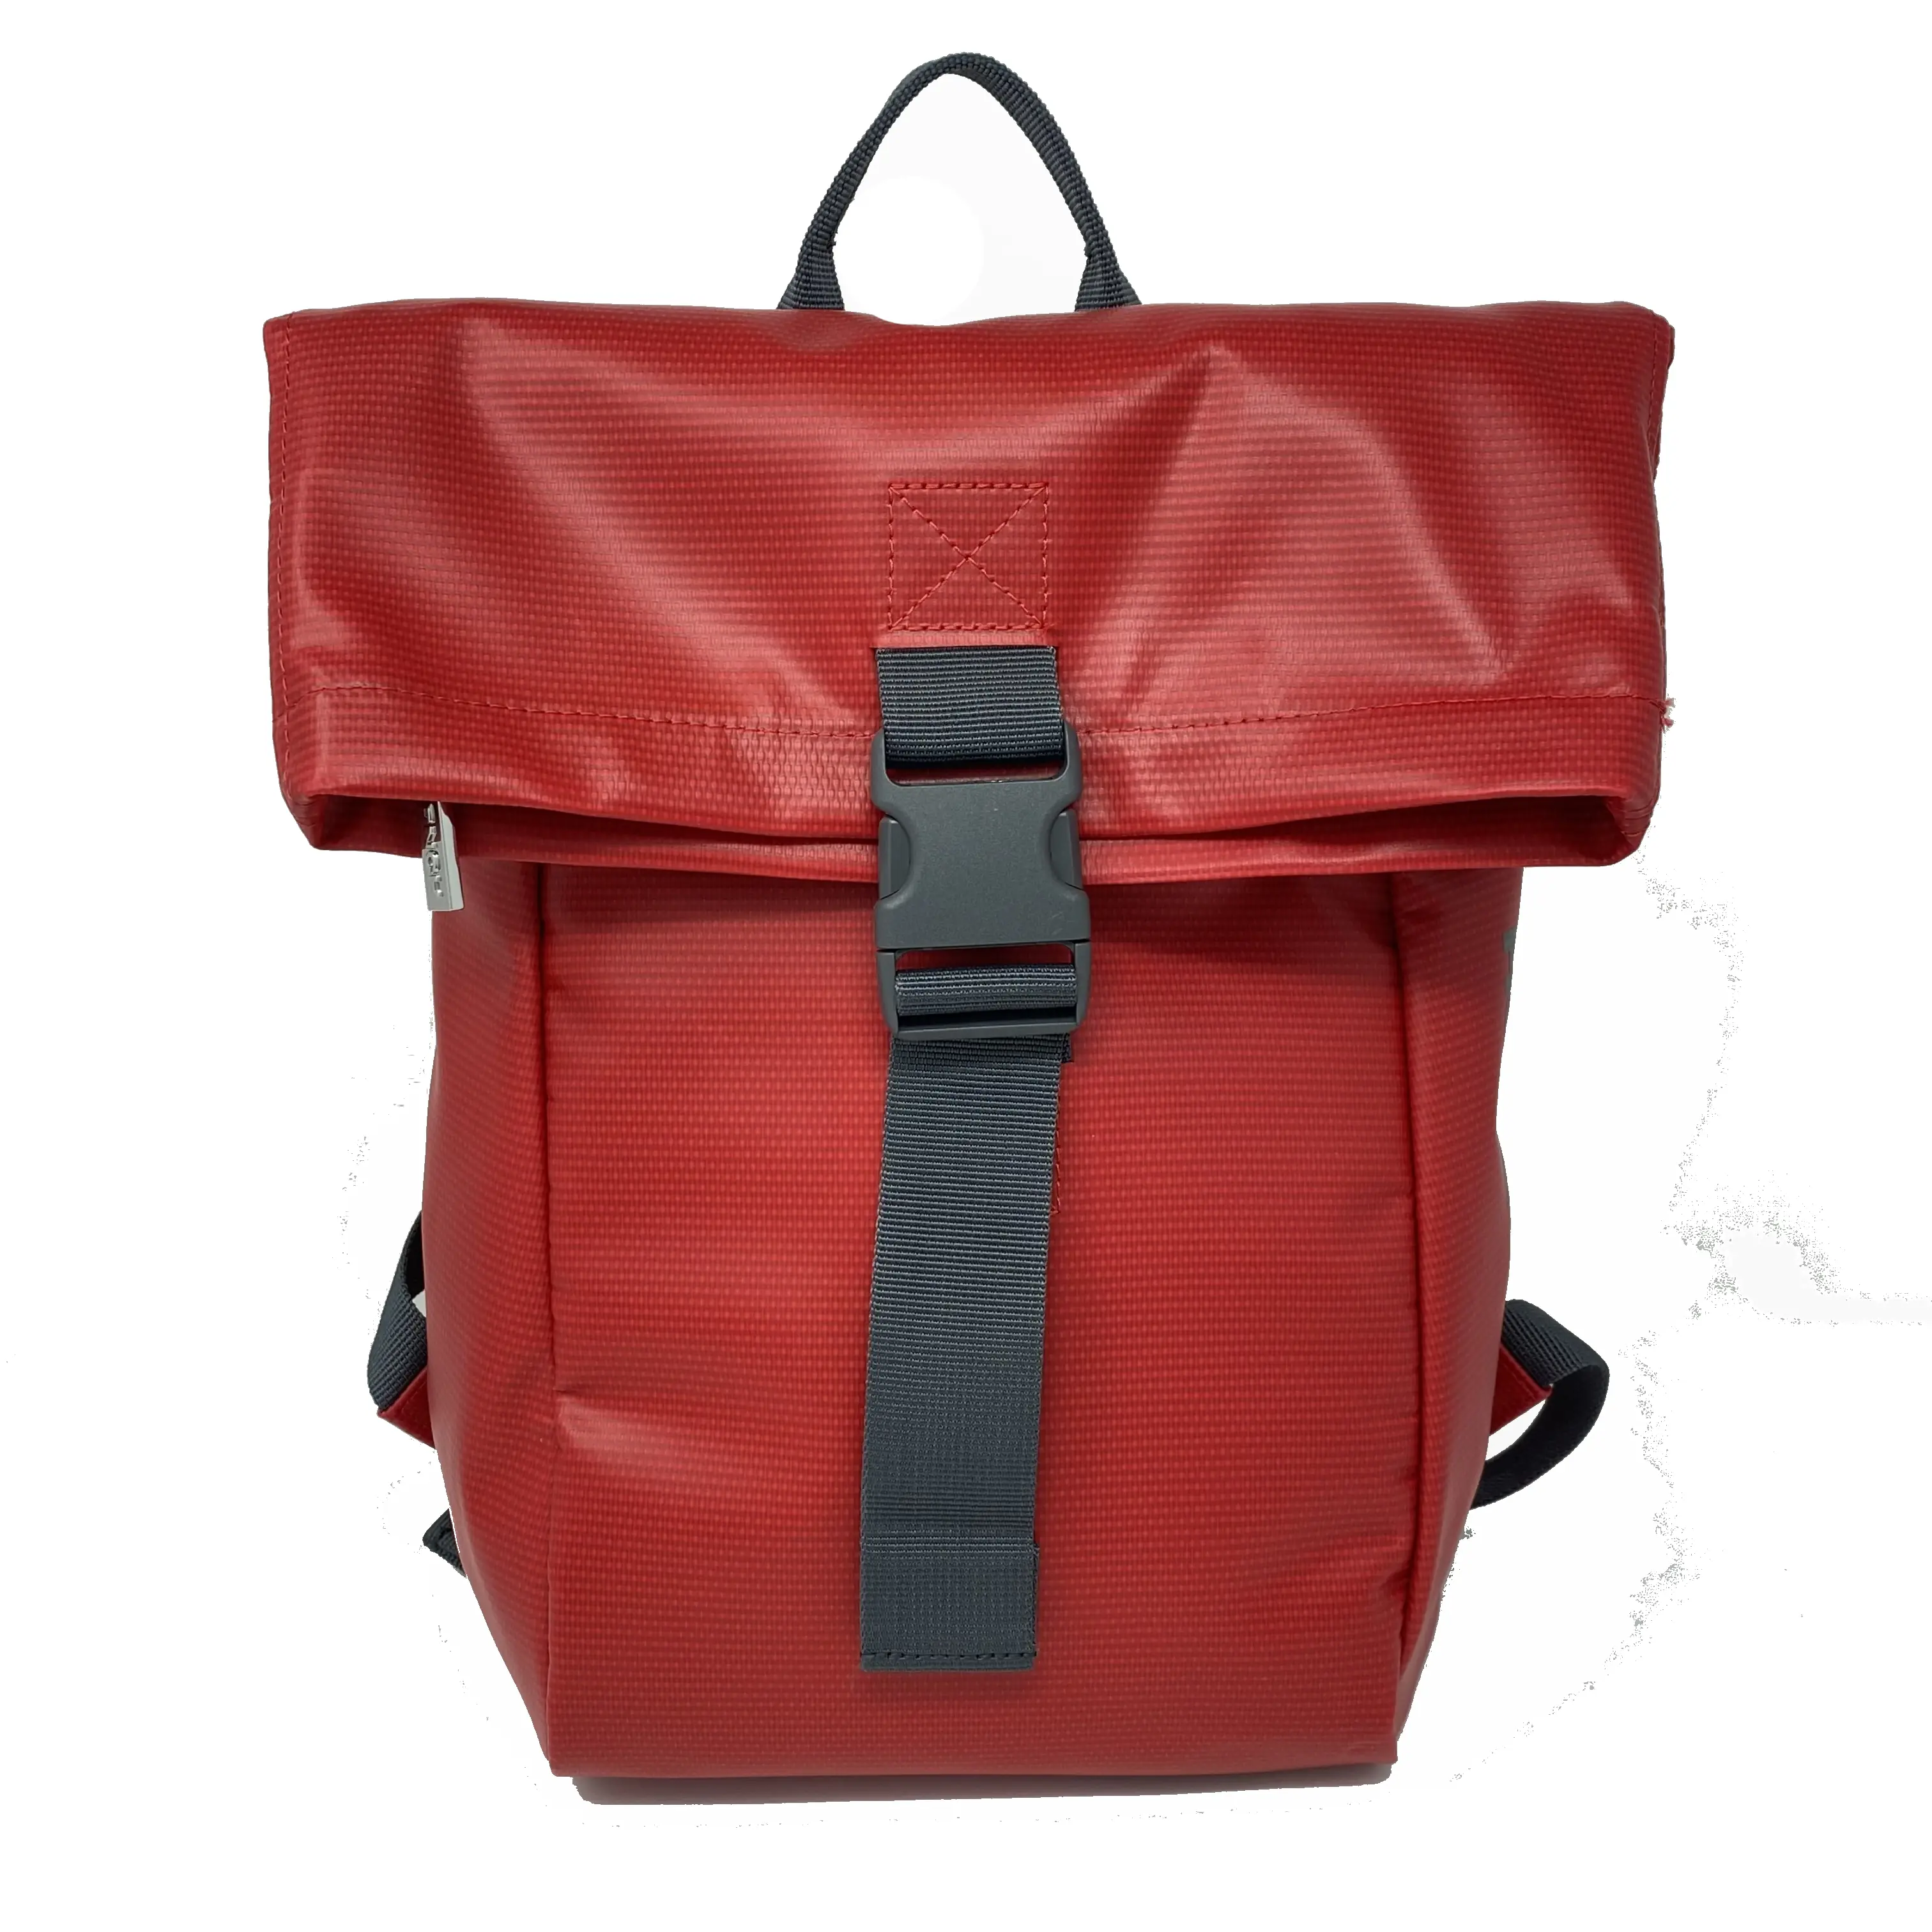 BREE PNCH 792 Rucksack - lava red